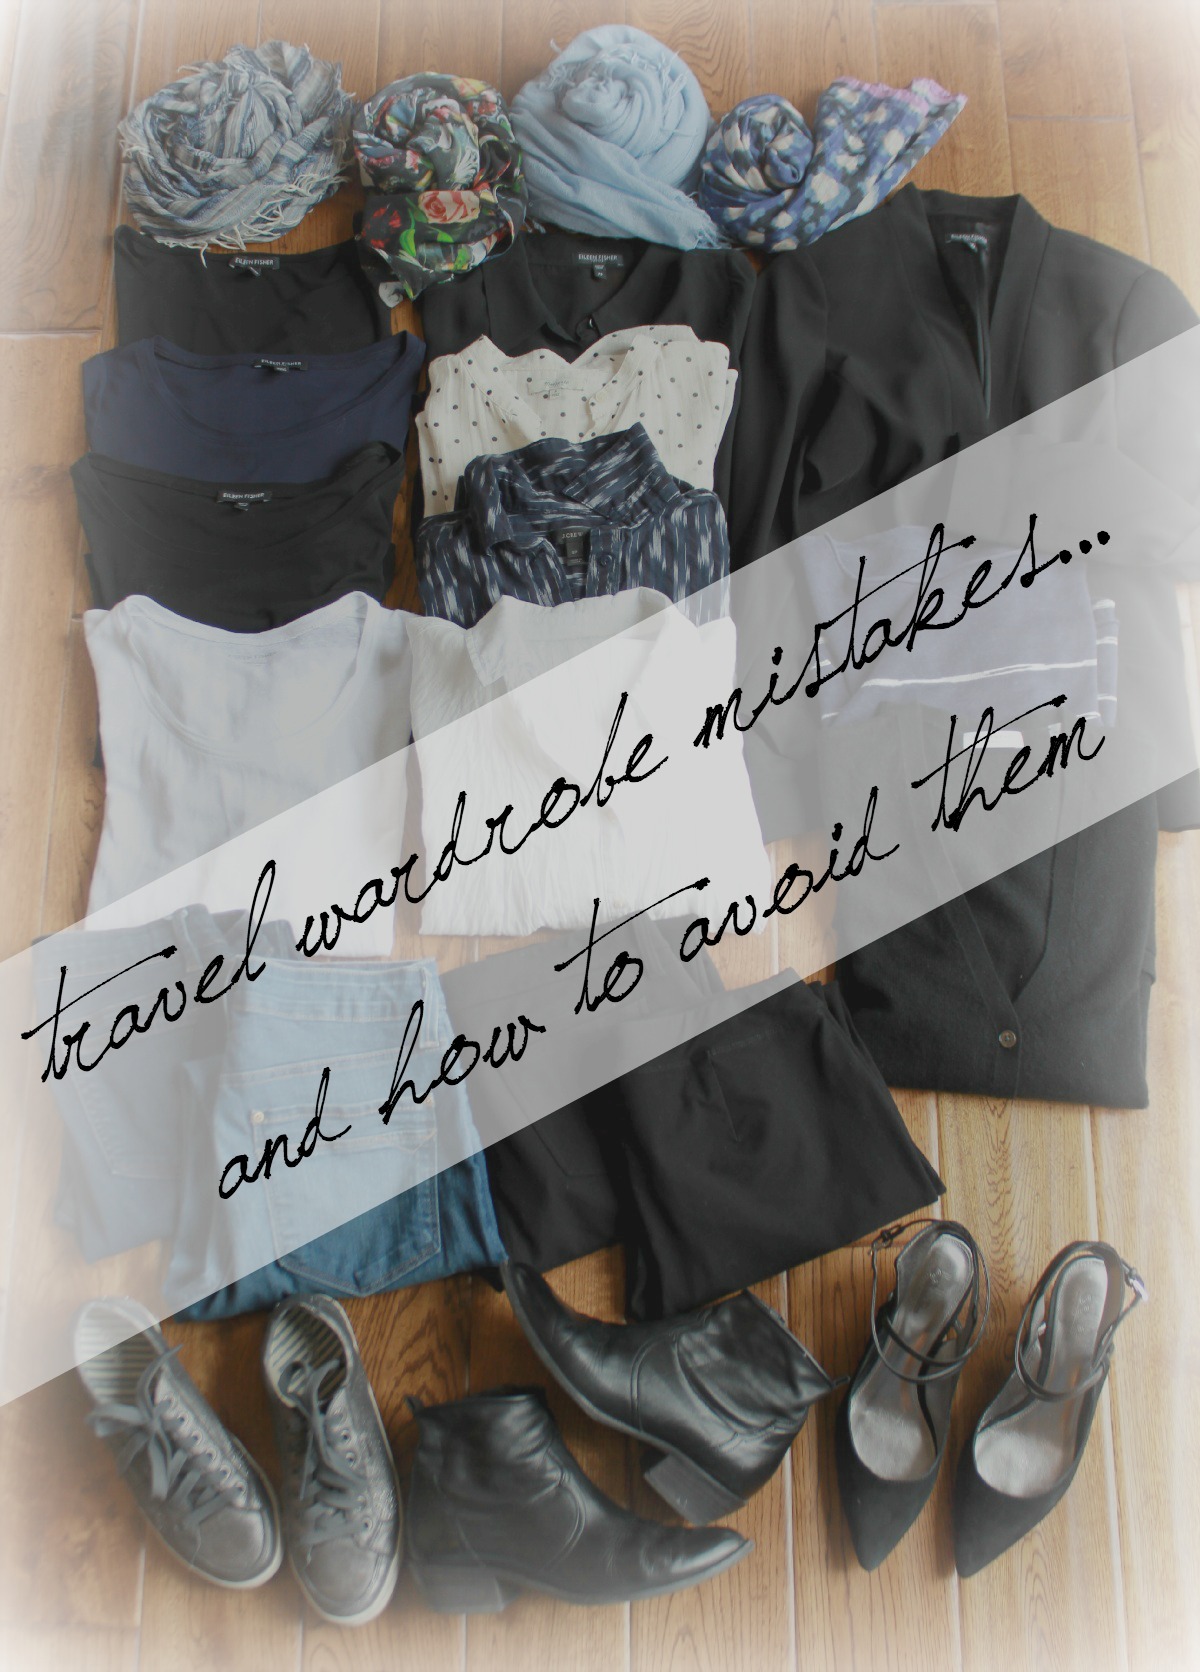 Thursday Miscellany: Packing Tips and One Last Chance…